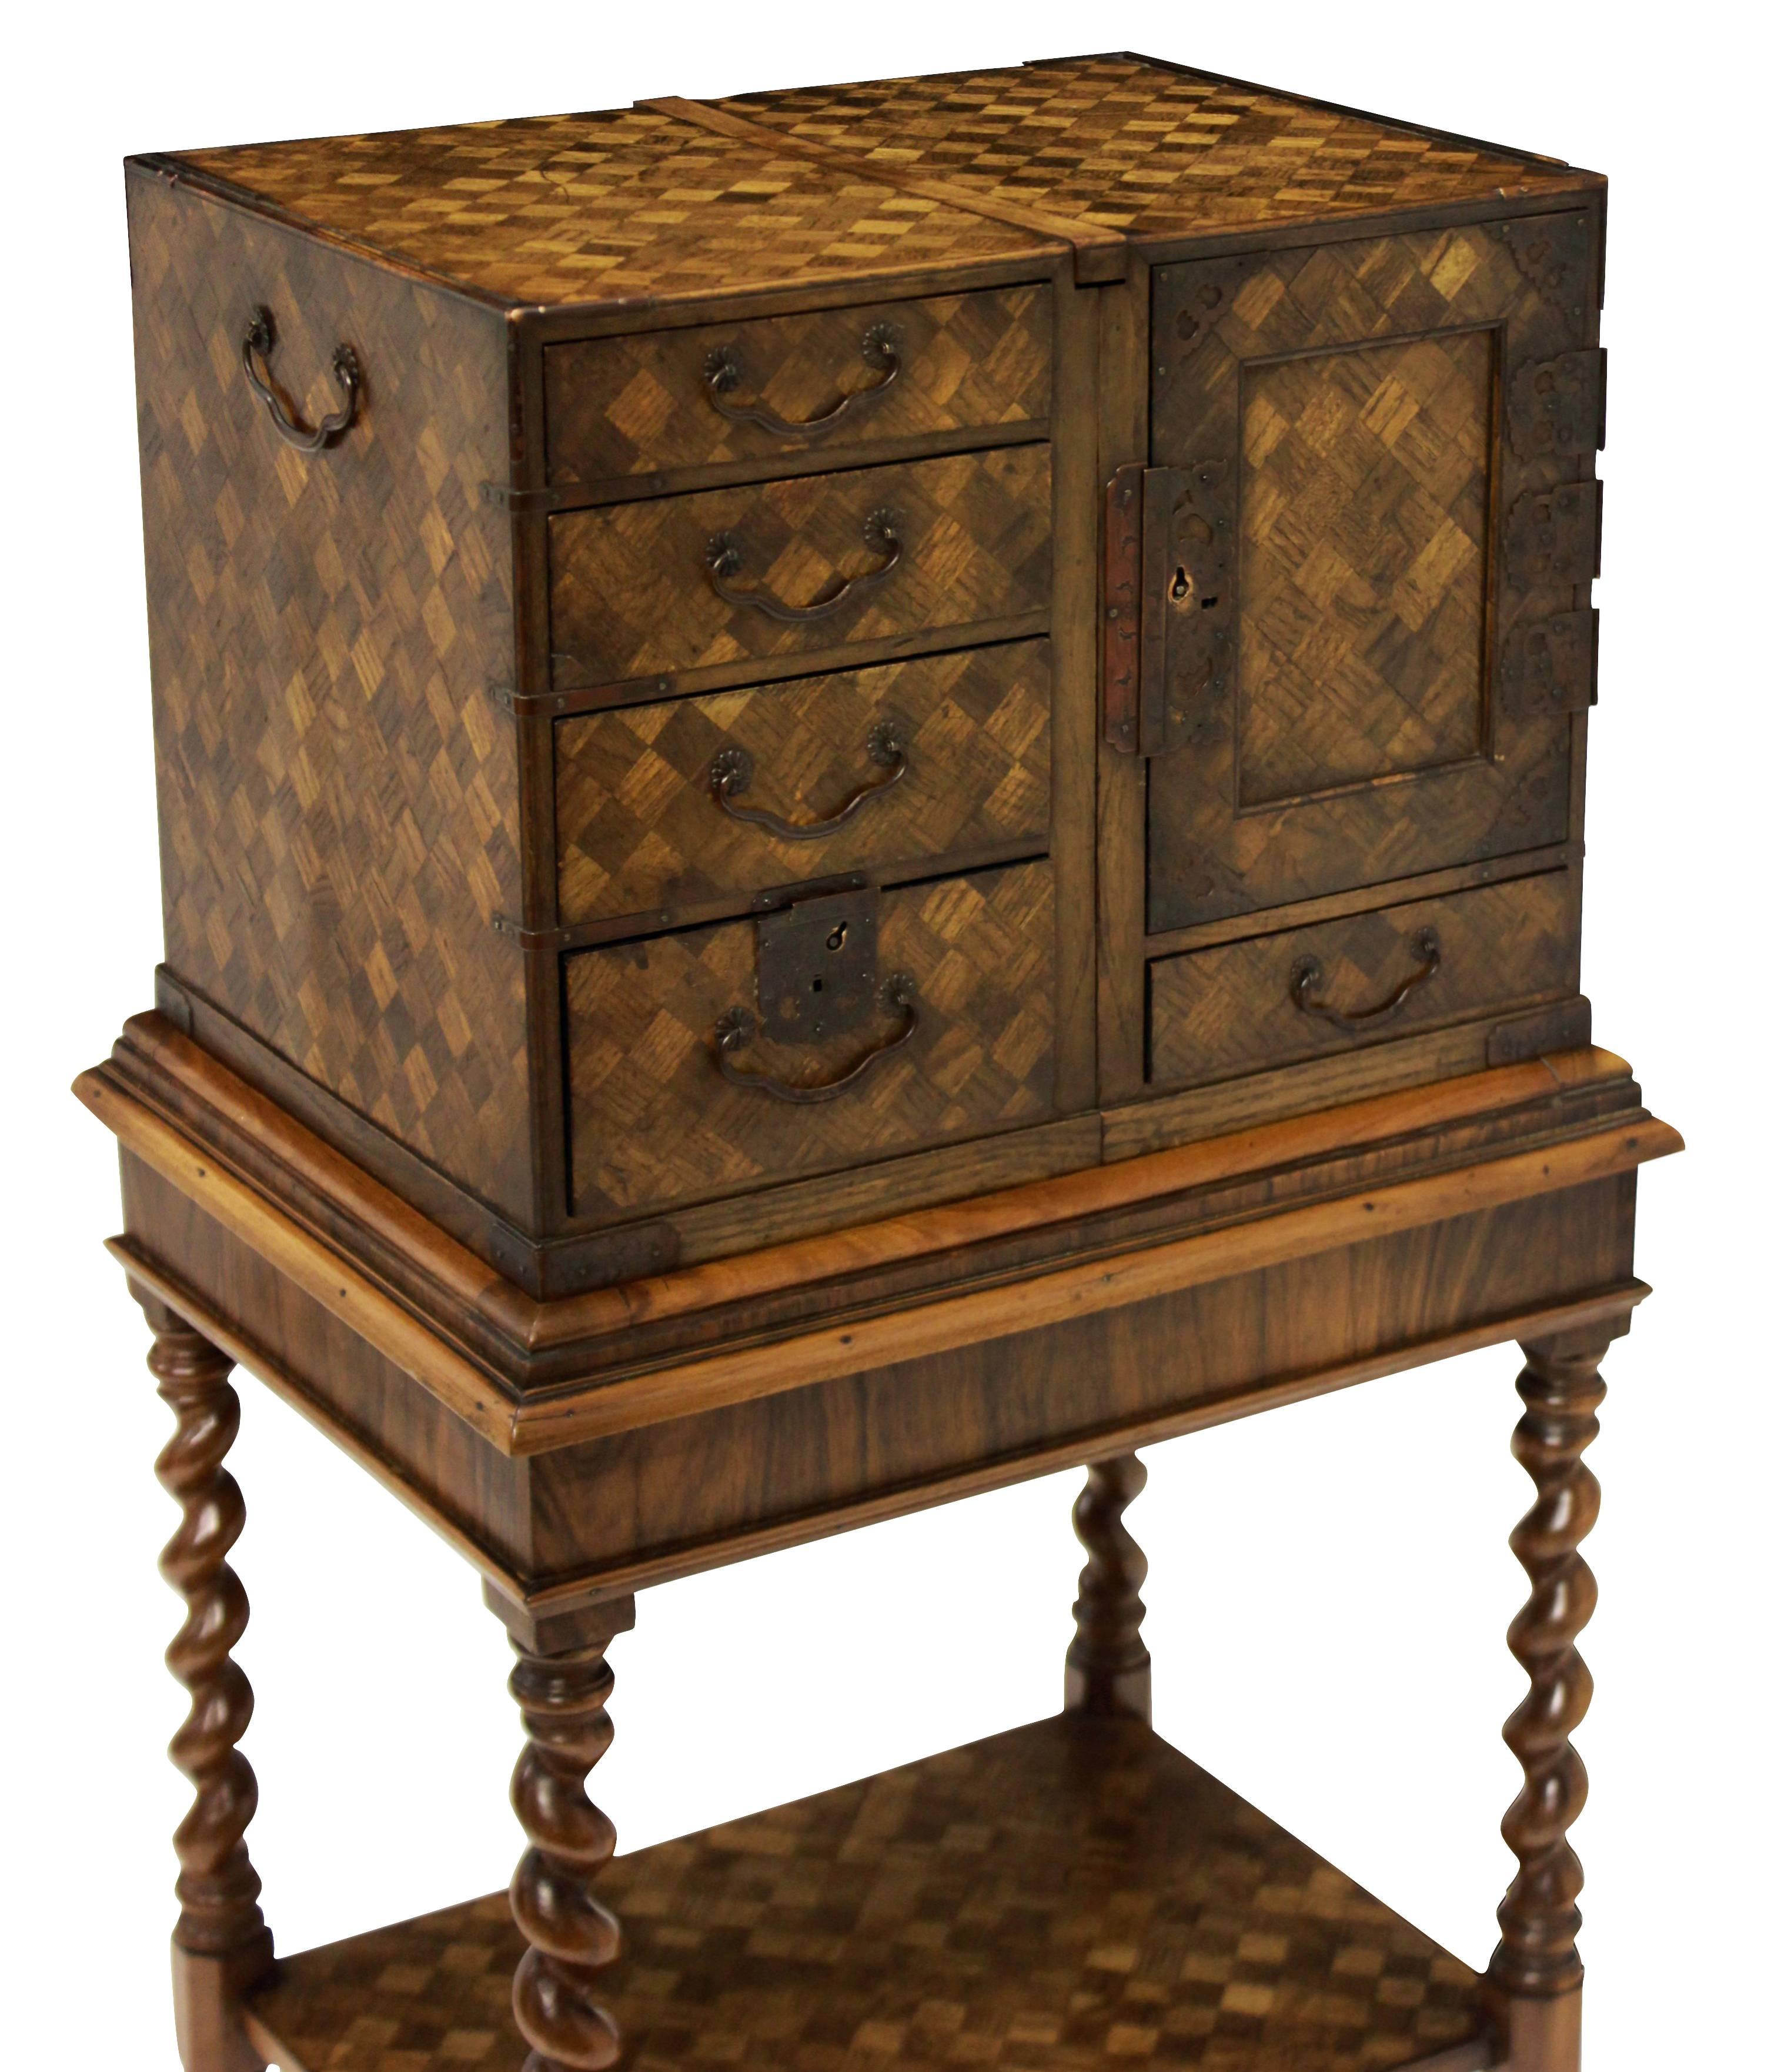 An English William & Mary chest on stand in walnut and oak, with a Japanned interior of red & black lacquer.